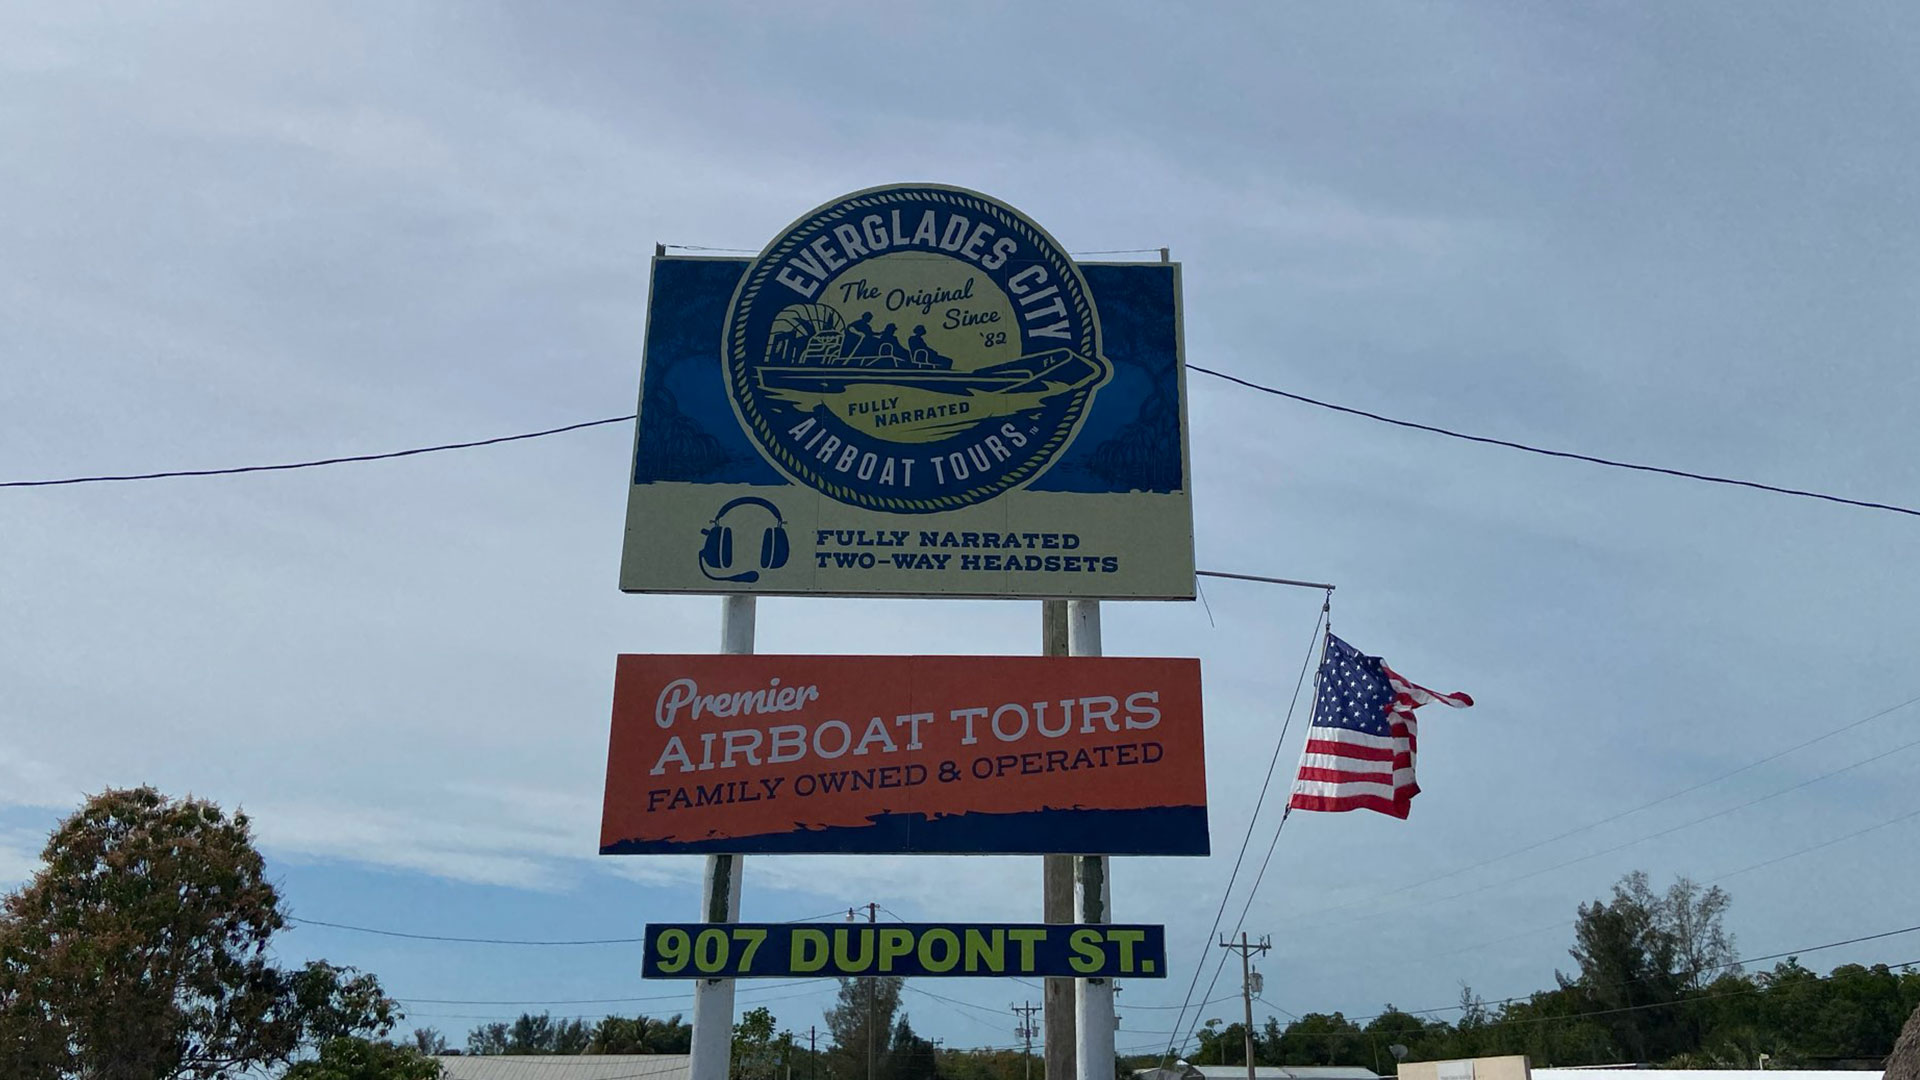 Everglades City Airboat Tours on Visit Everglades City